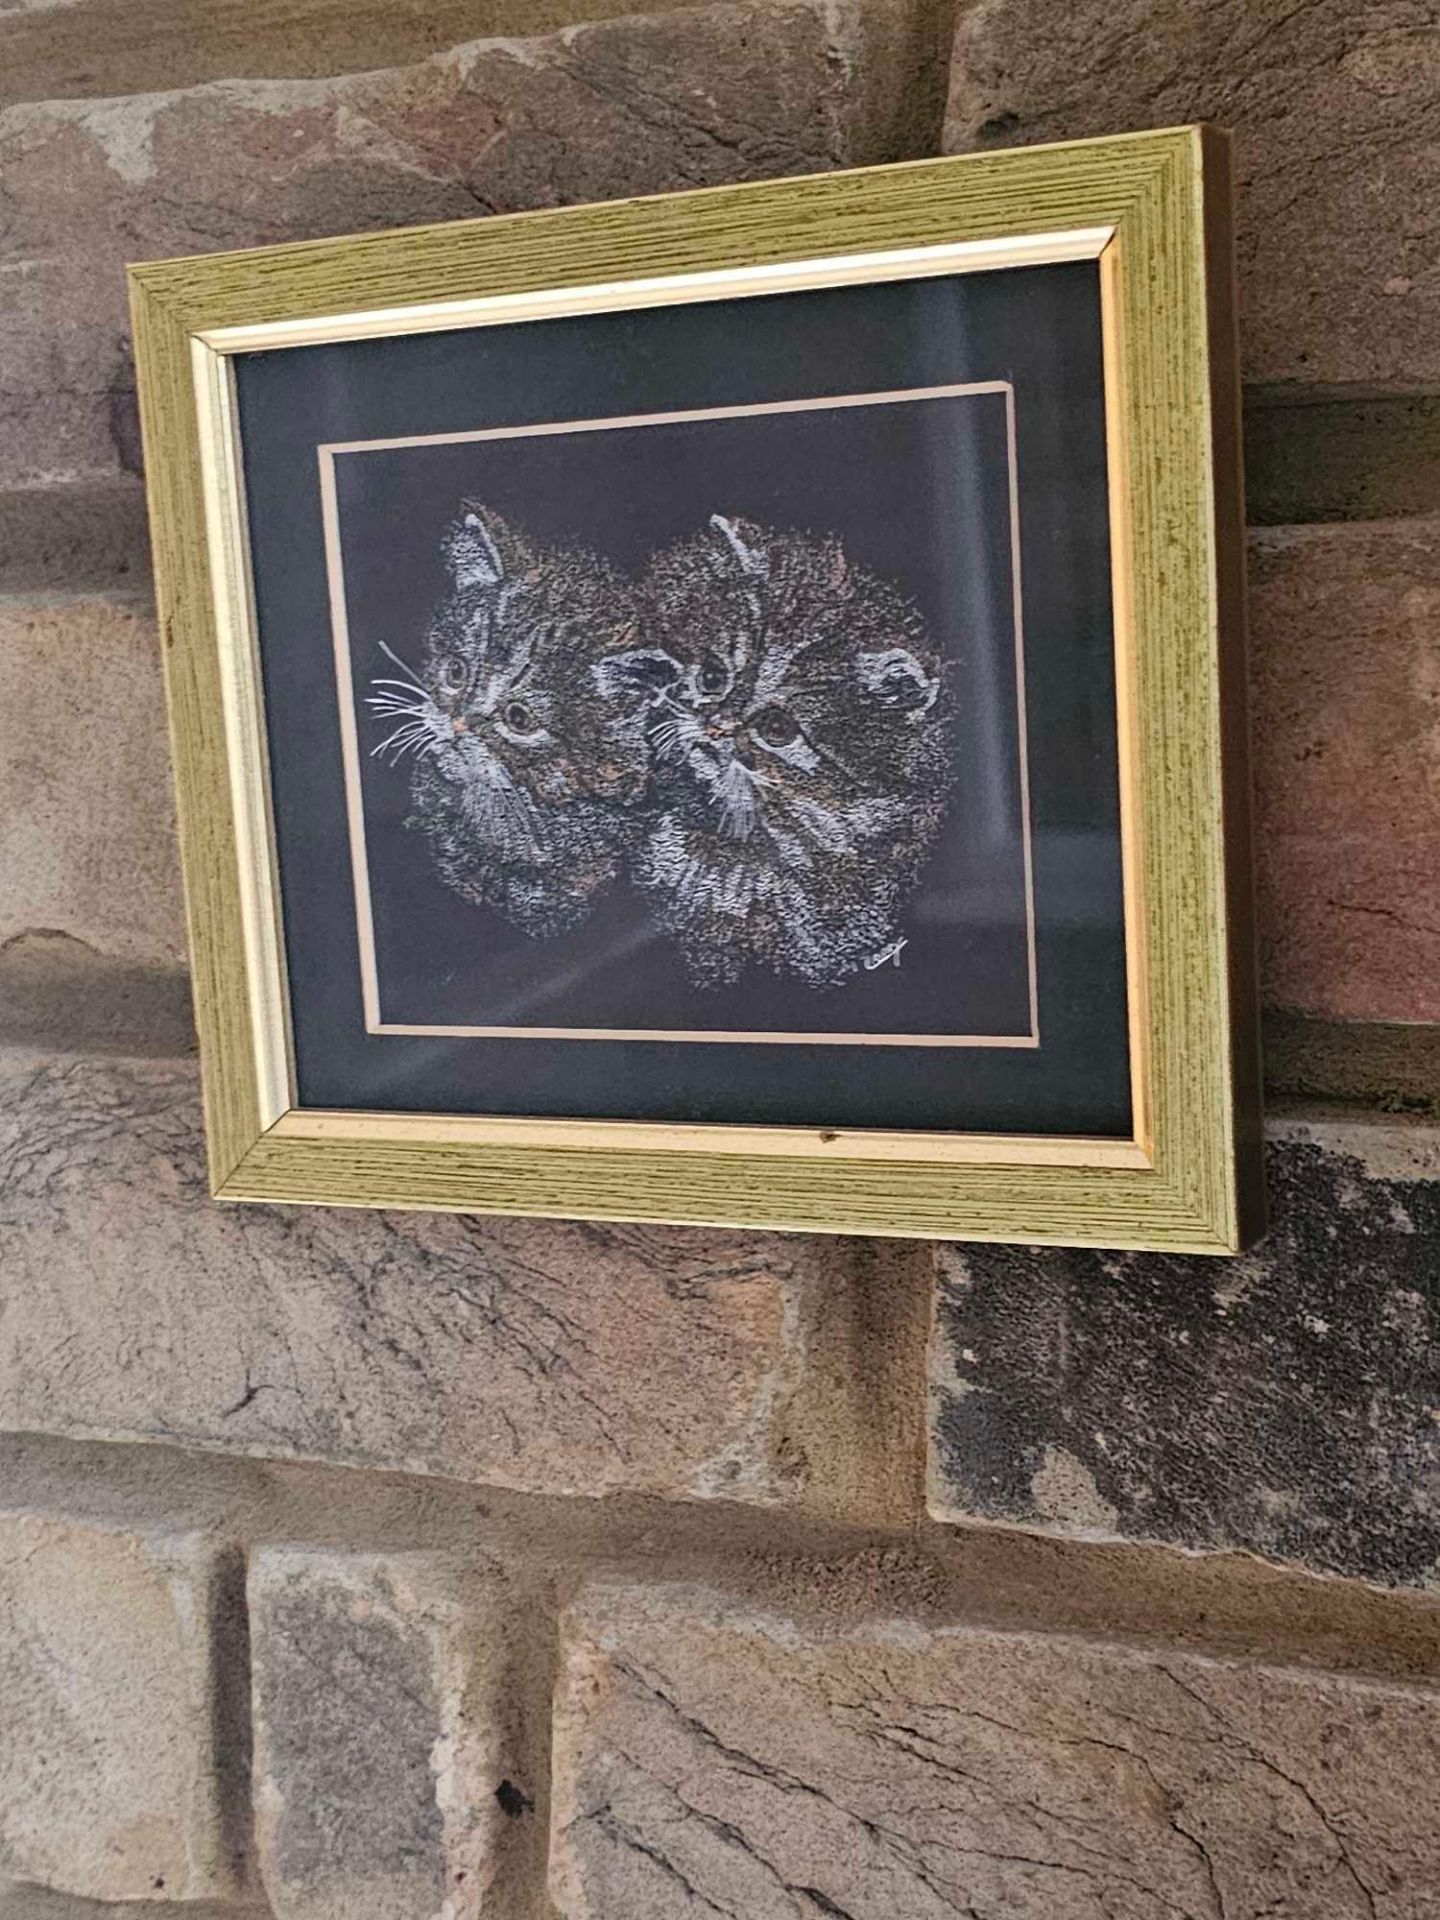 A Small Picture Frame With A Print Of Kittens 18 X 15cm - Image 2 of 2